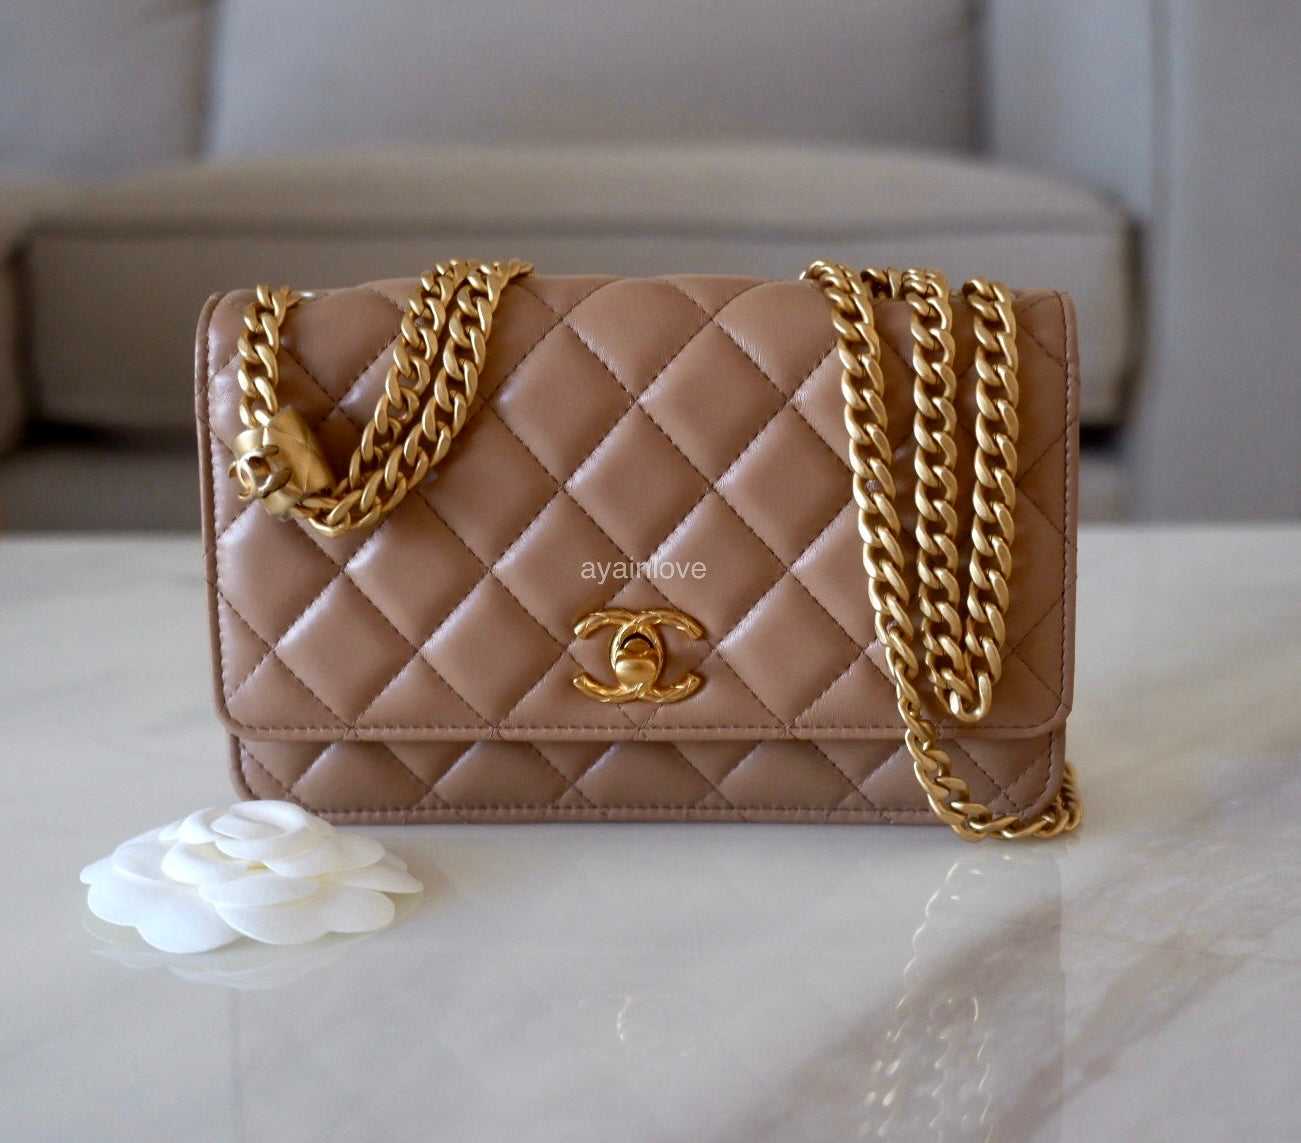 CHANEL, Bags, Chanel 9 Wallet On Chain Leather Lamb Skin Bag Gold  Hardware